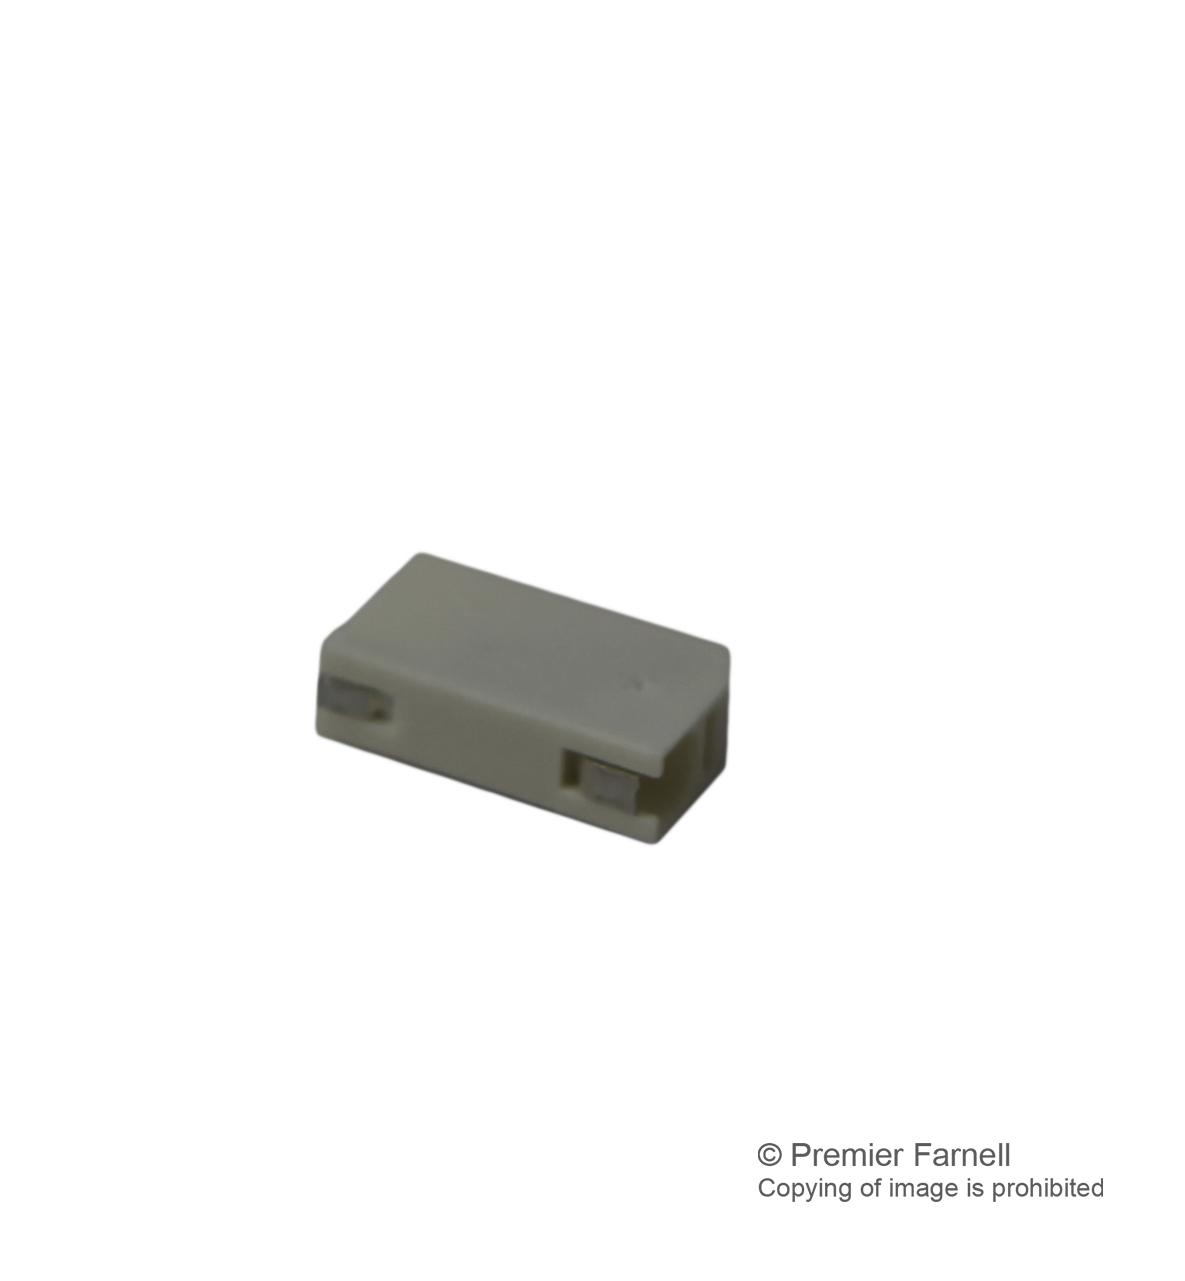 009276002021106 CONNECTOR, IDC, 2 WAY, 18 AWG AVX INTERCONNECT